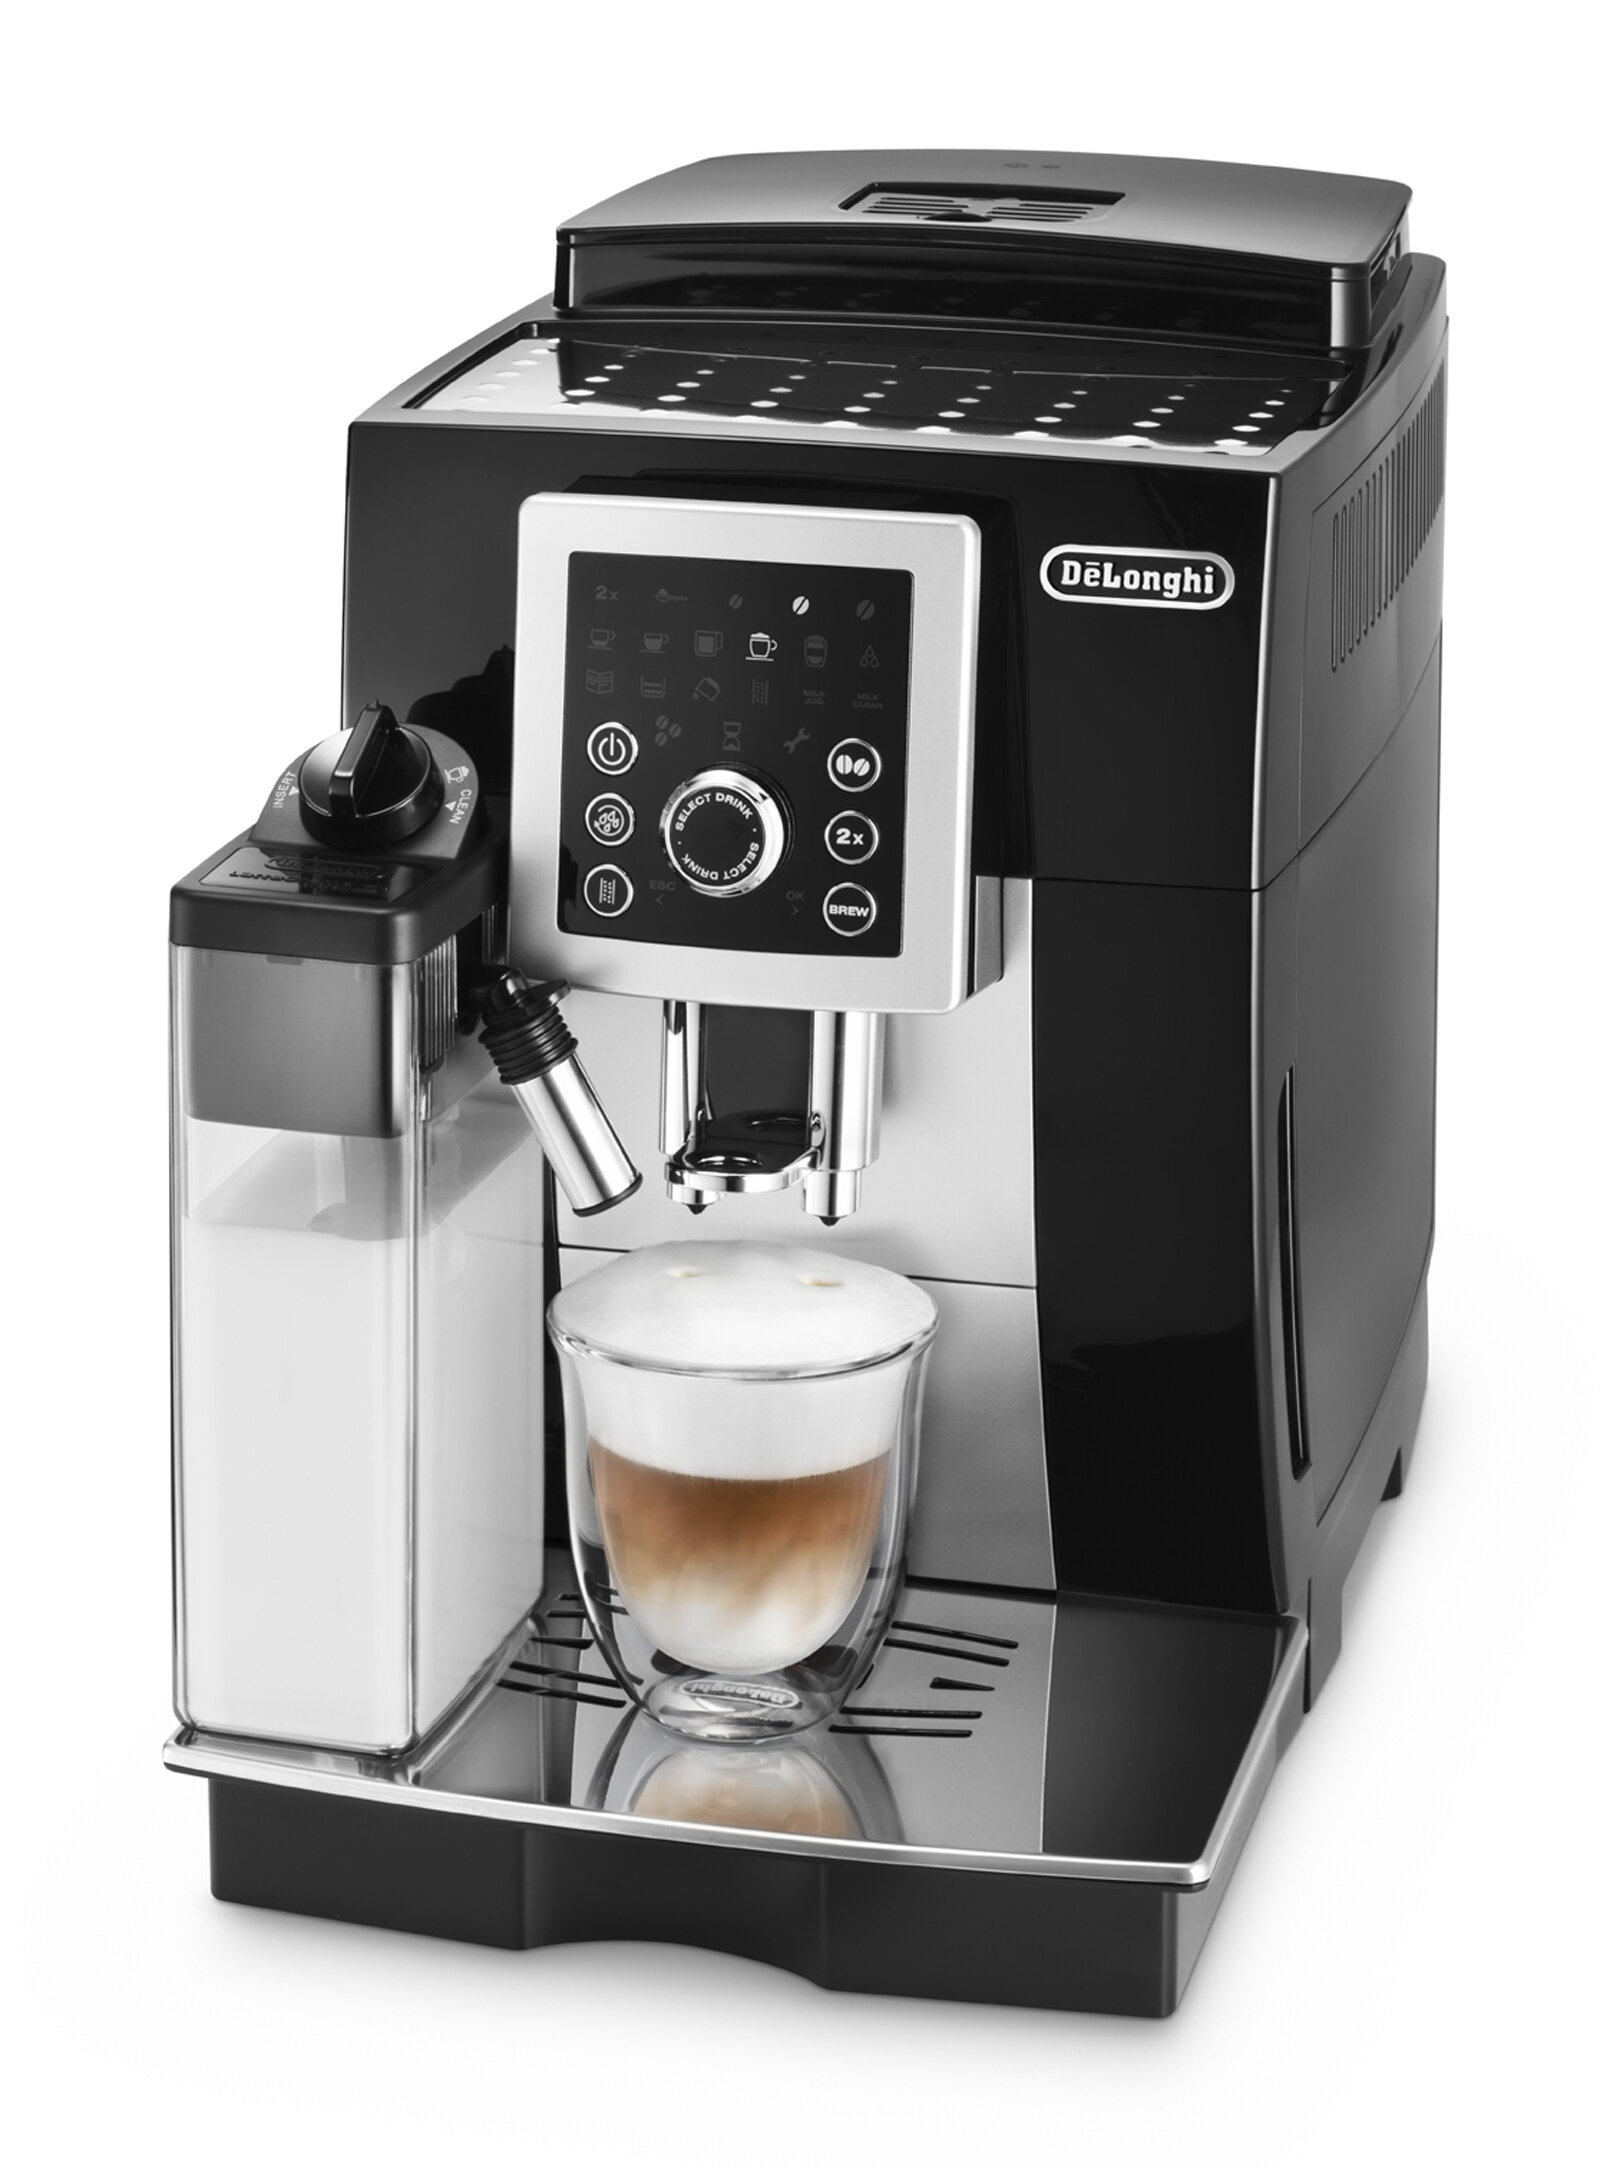 Apt Bog tanker DeLonghi Magnifica S Smart Fully Automatic Espresso, Cappuccino and Coffee  Machine with One Touch LatteCrema System & Reviews | Wayfair